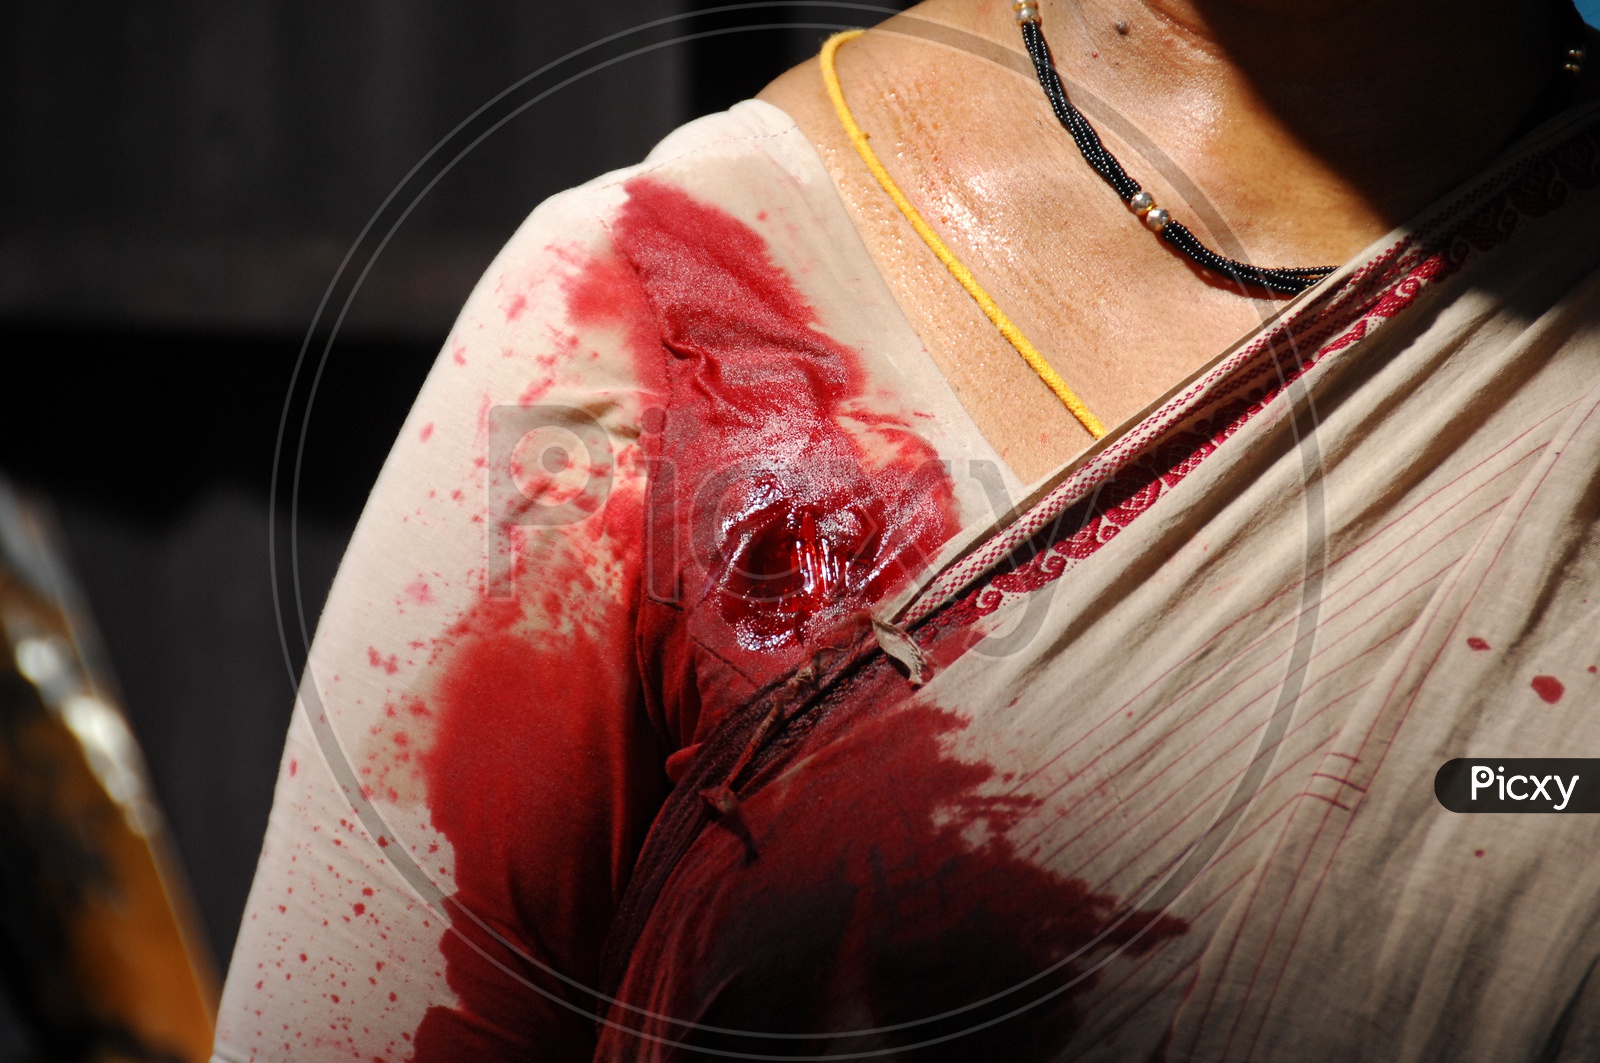 Indian Woman Was Shot With a Bullet And Blood Stains in Movie Working Stills